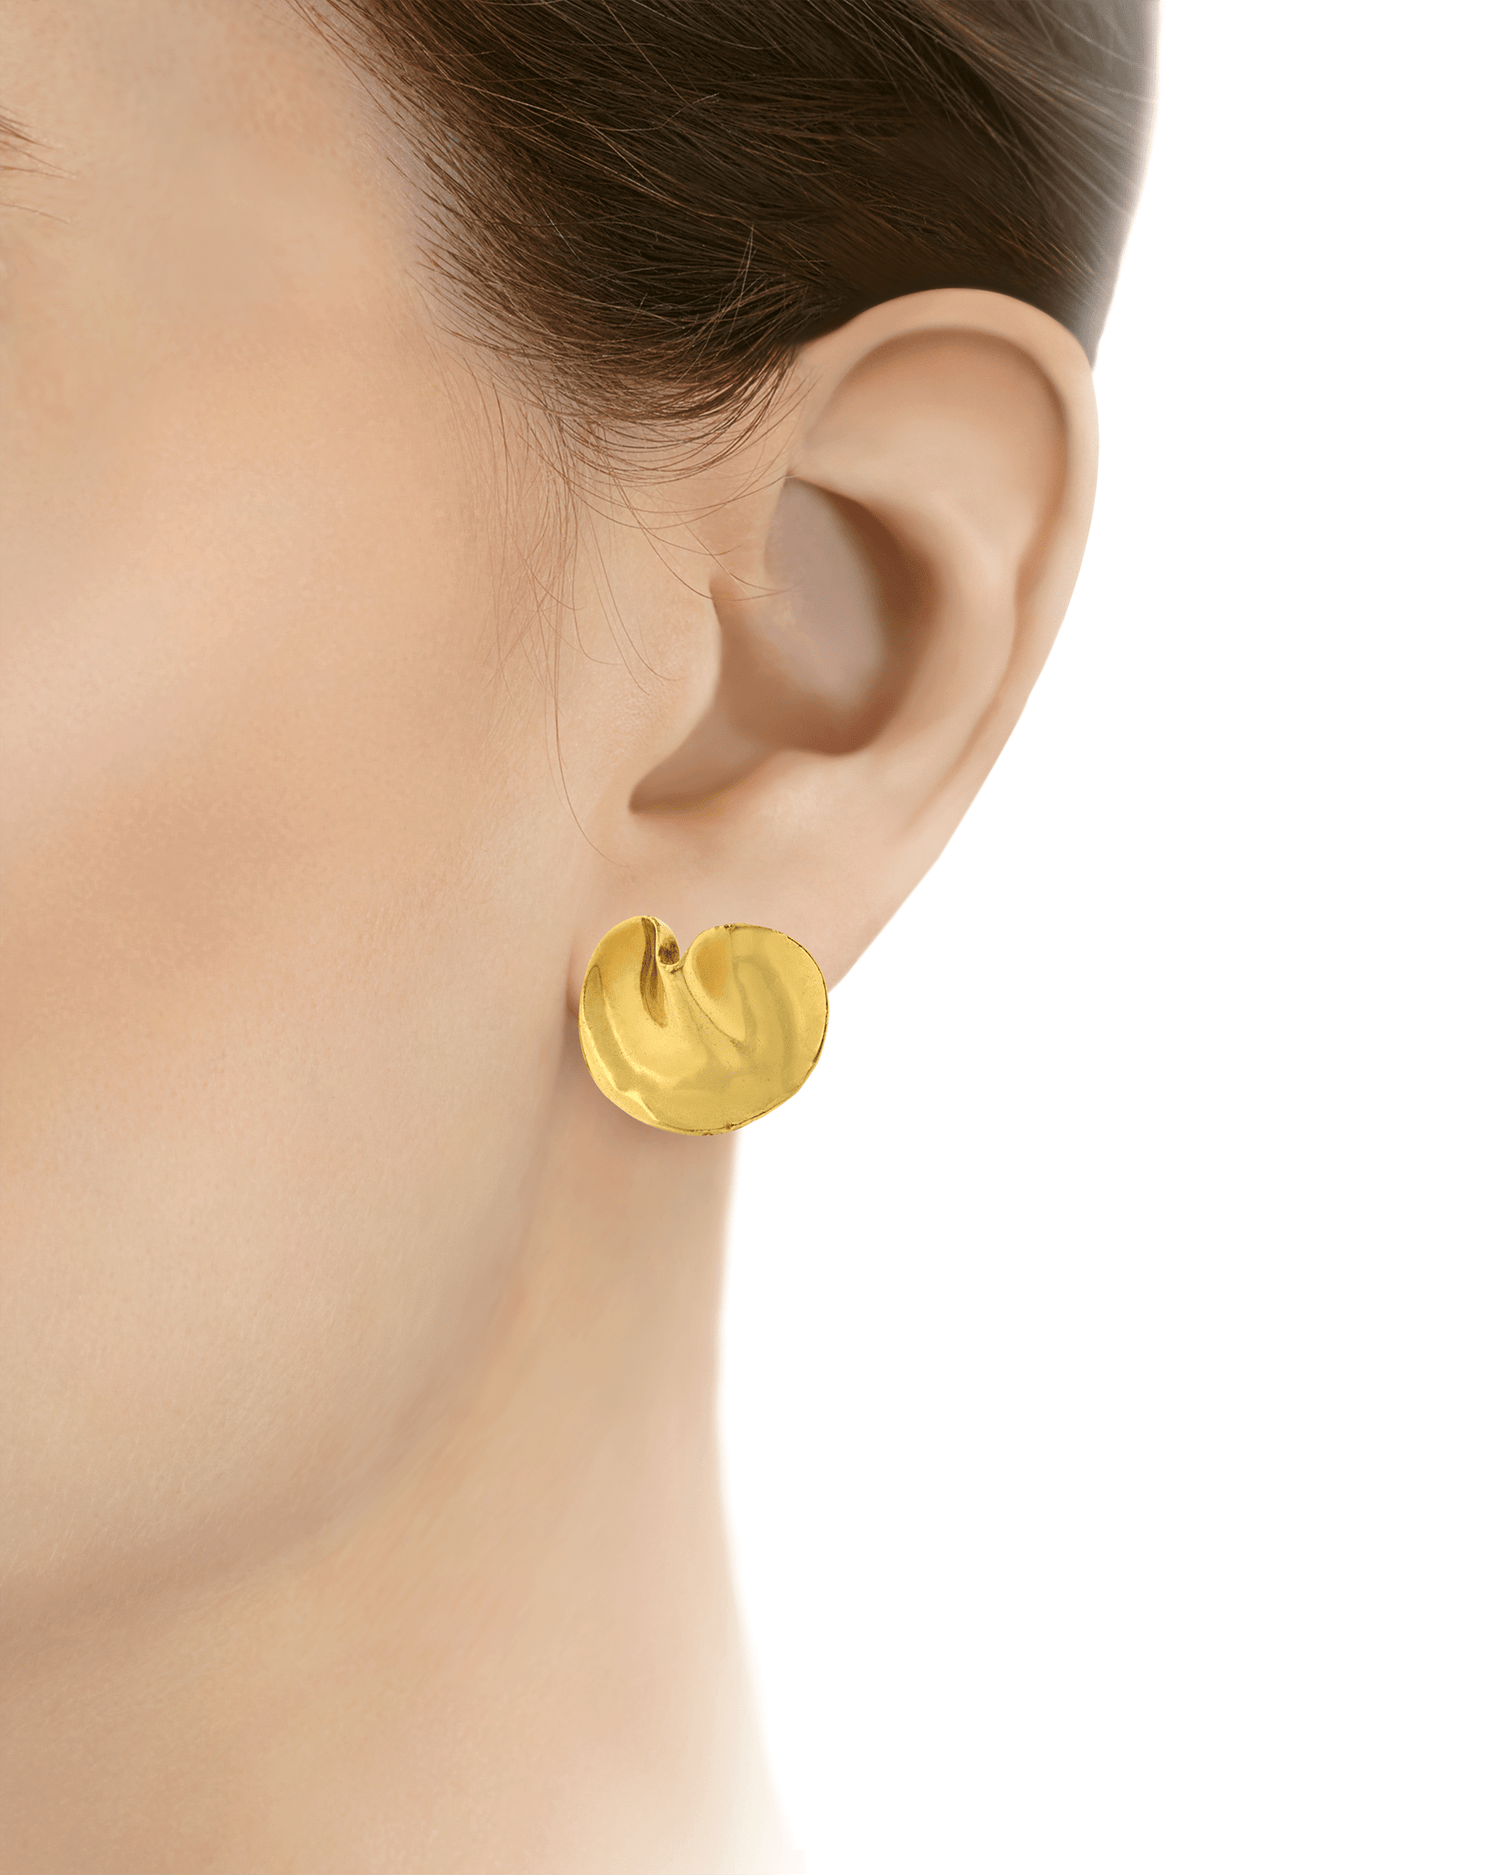 Tiffany & Co. Gold Lily Pad Earrings